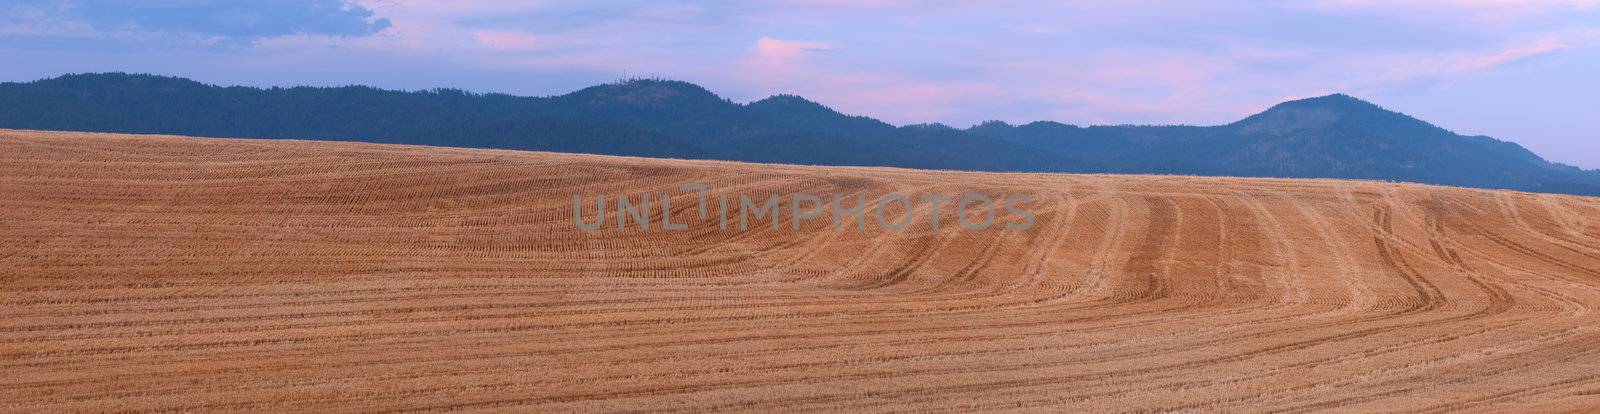 Harvested wheat field patterns and The Palouse Range on a summer evening, Latah County, Idaho, USA by CharlesBolin